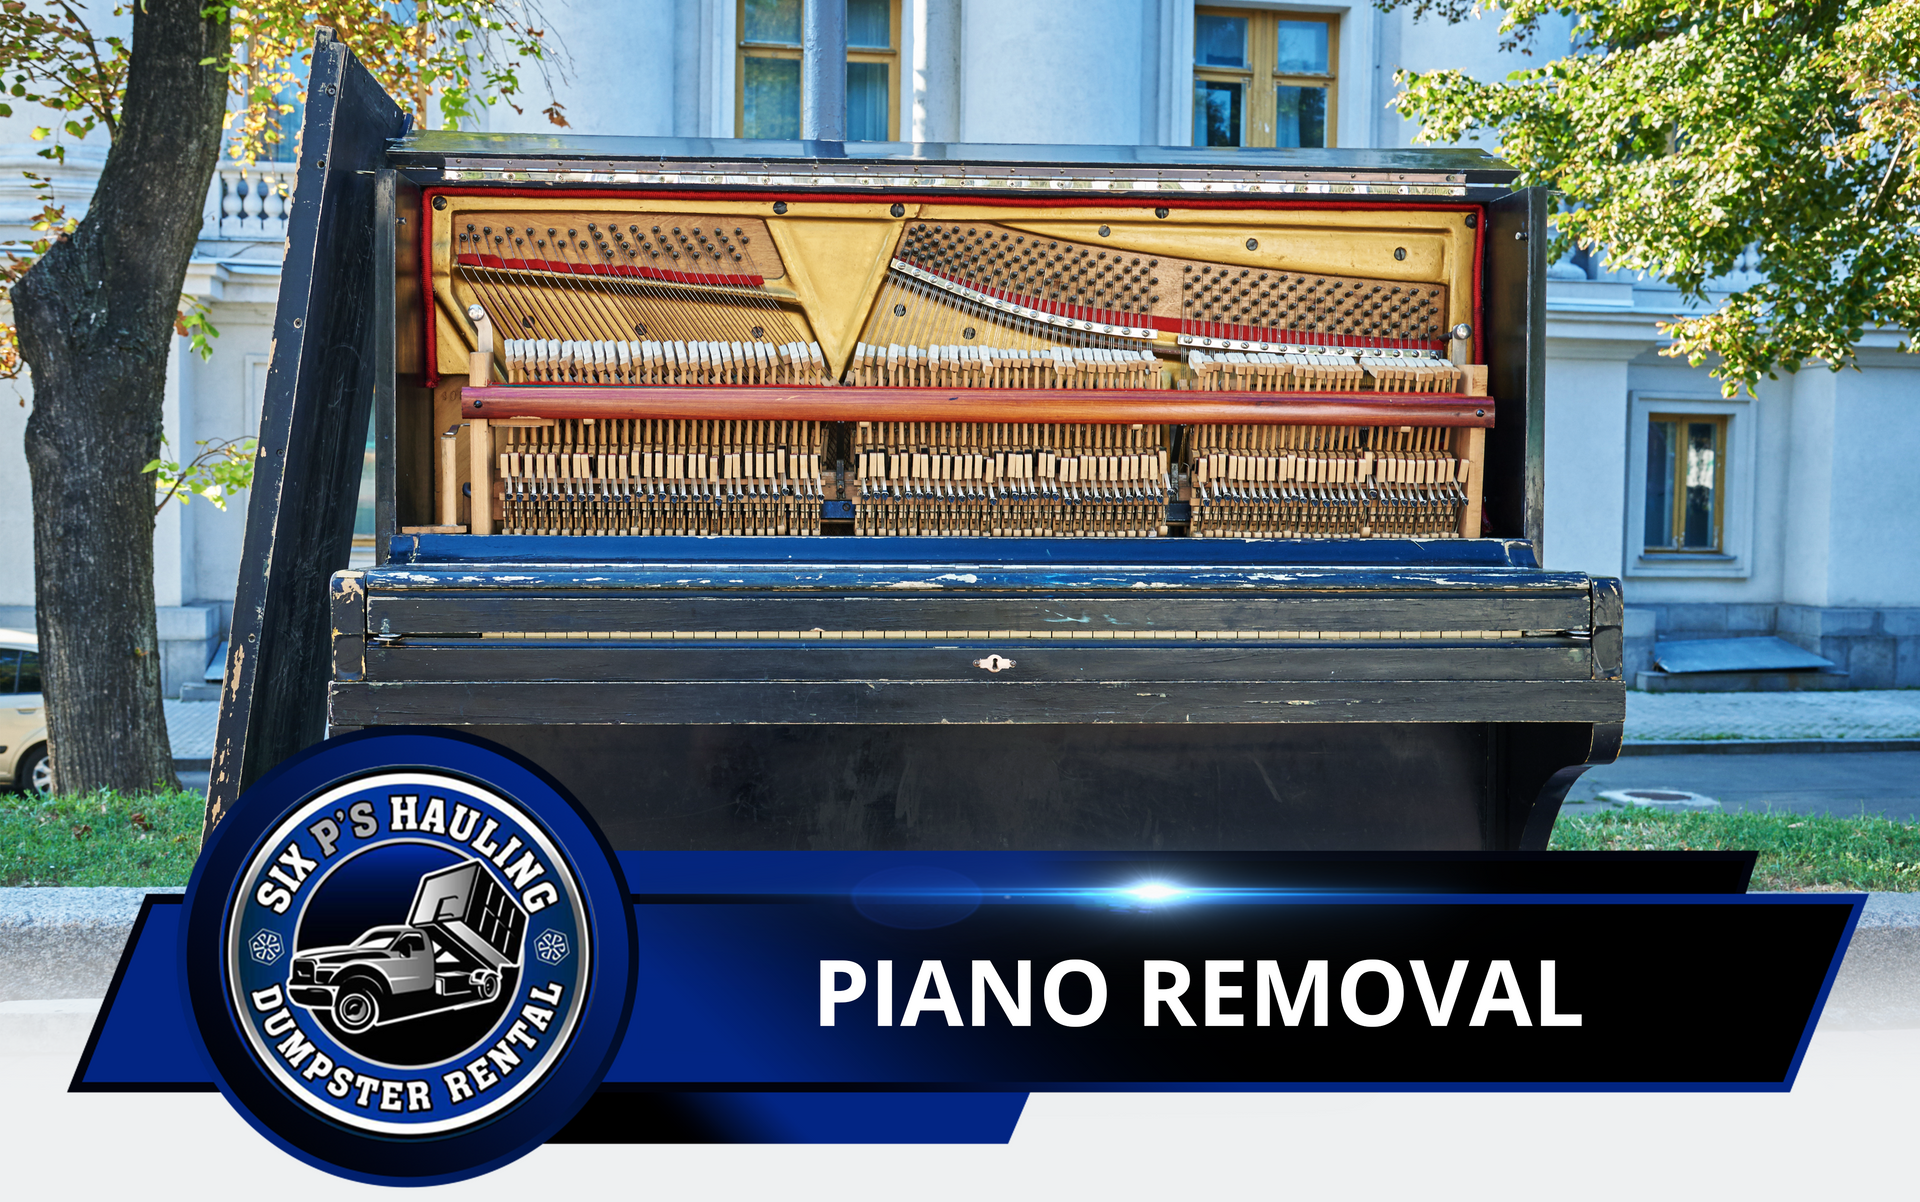 Piano Removal in Claremont, CA